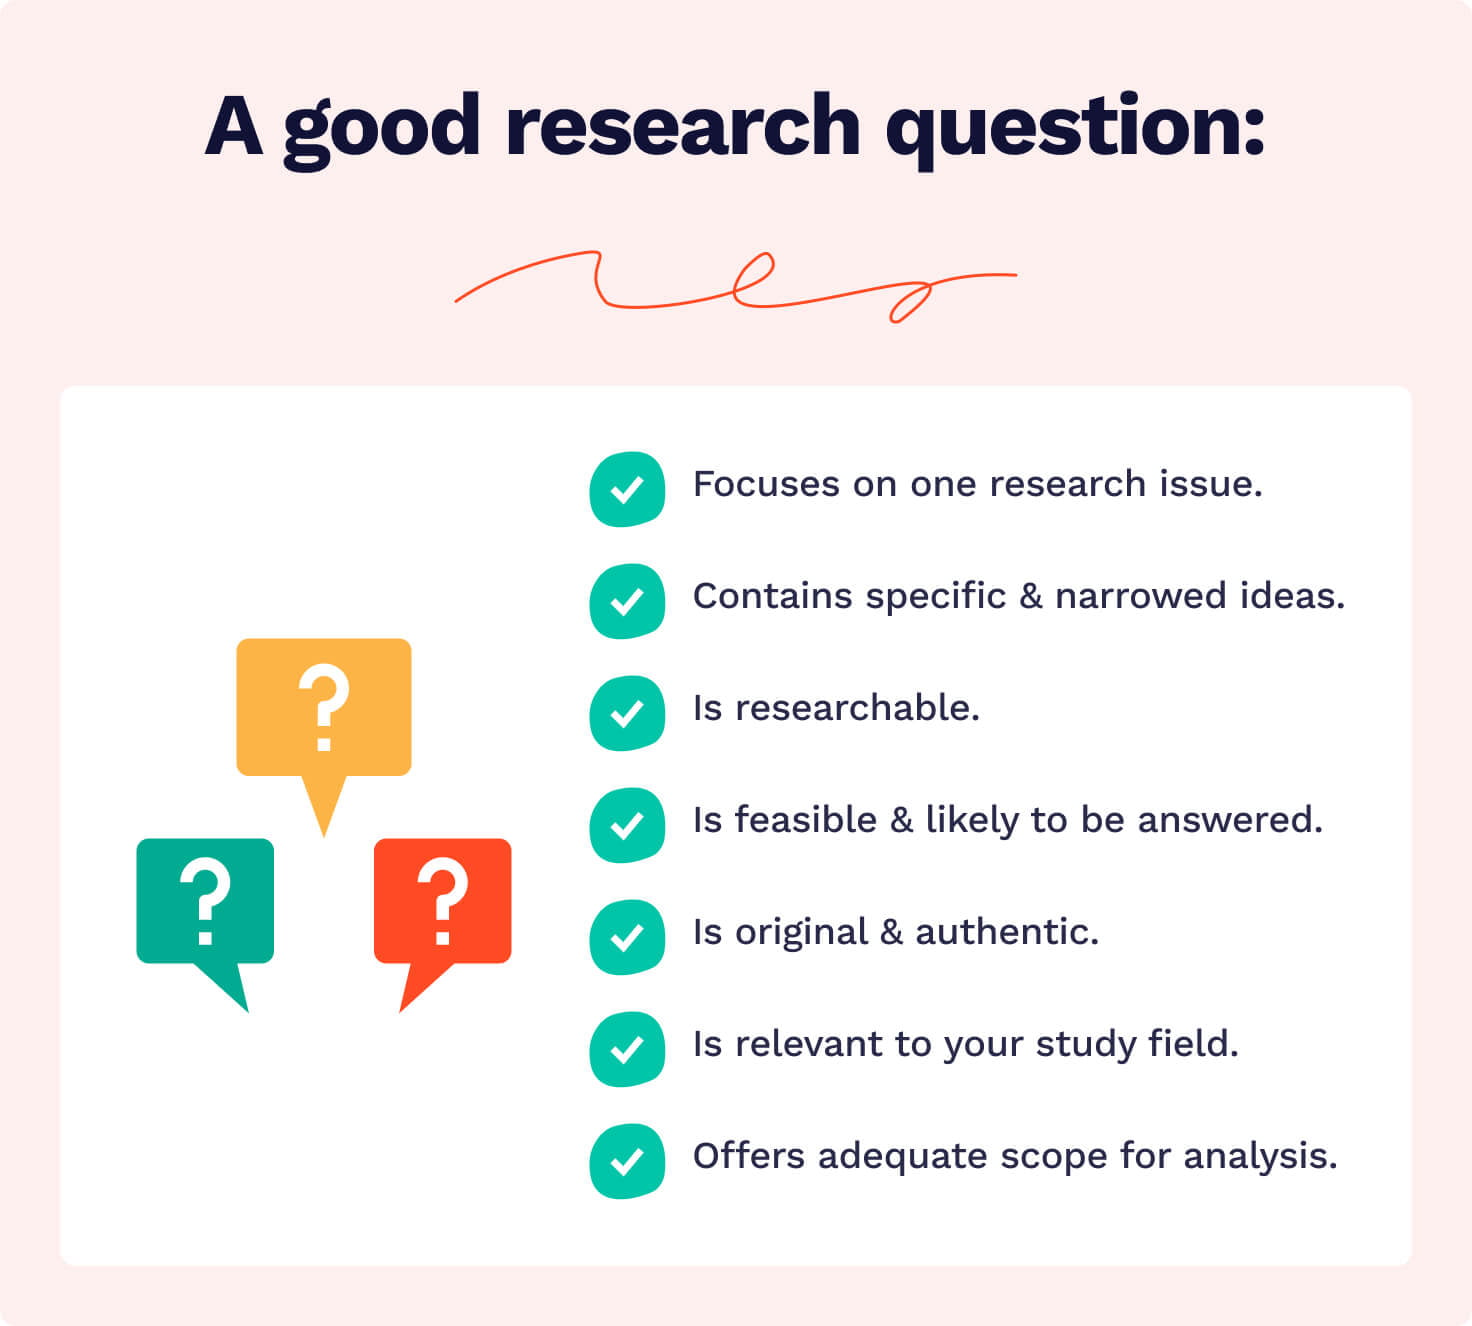 research question good or bad